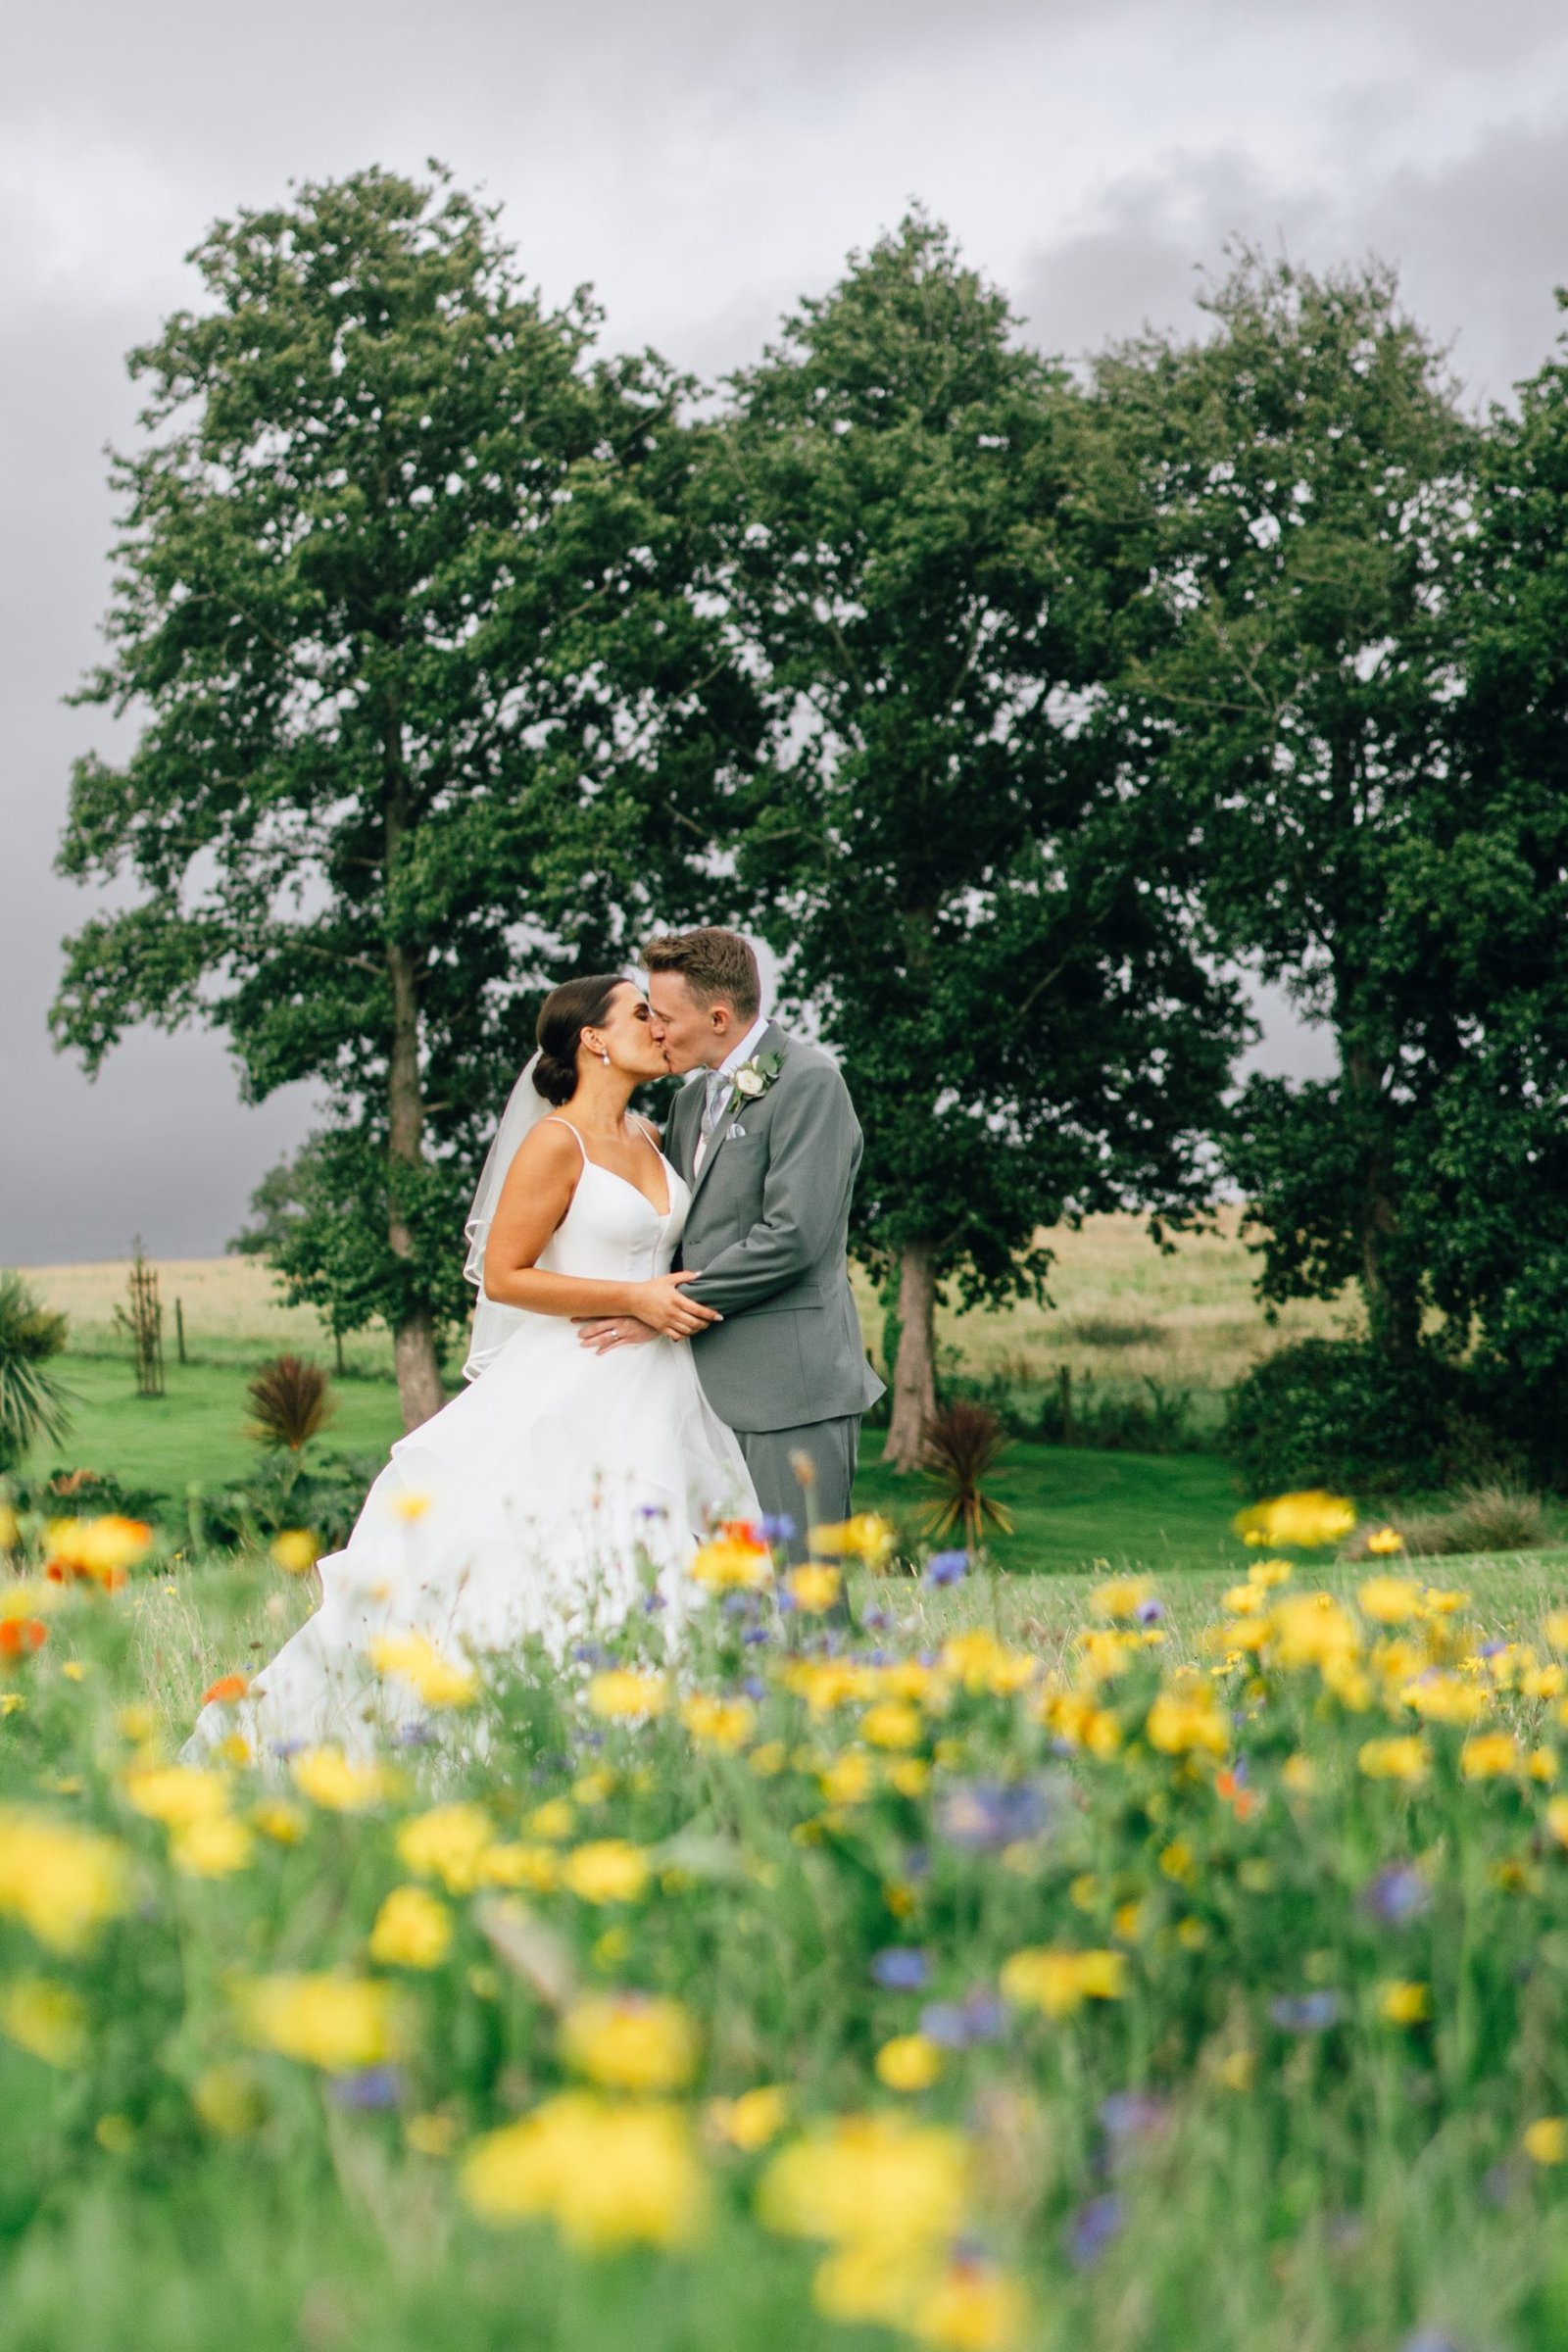 Younger photography wedding at Tredudwell Manor